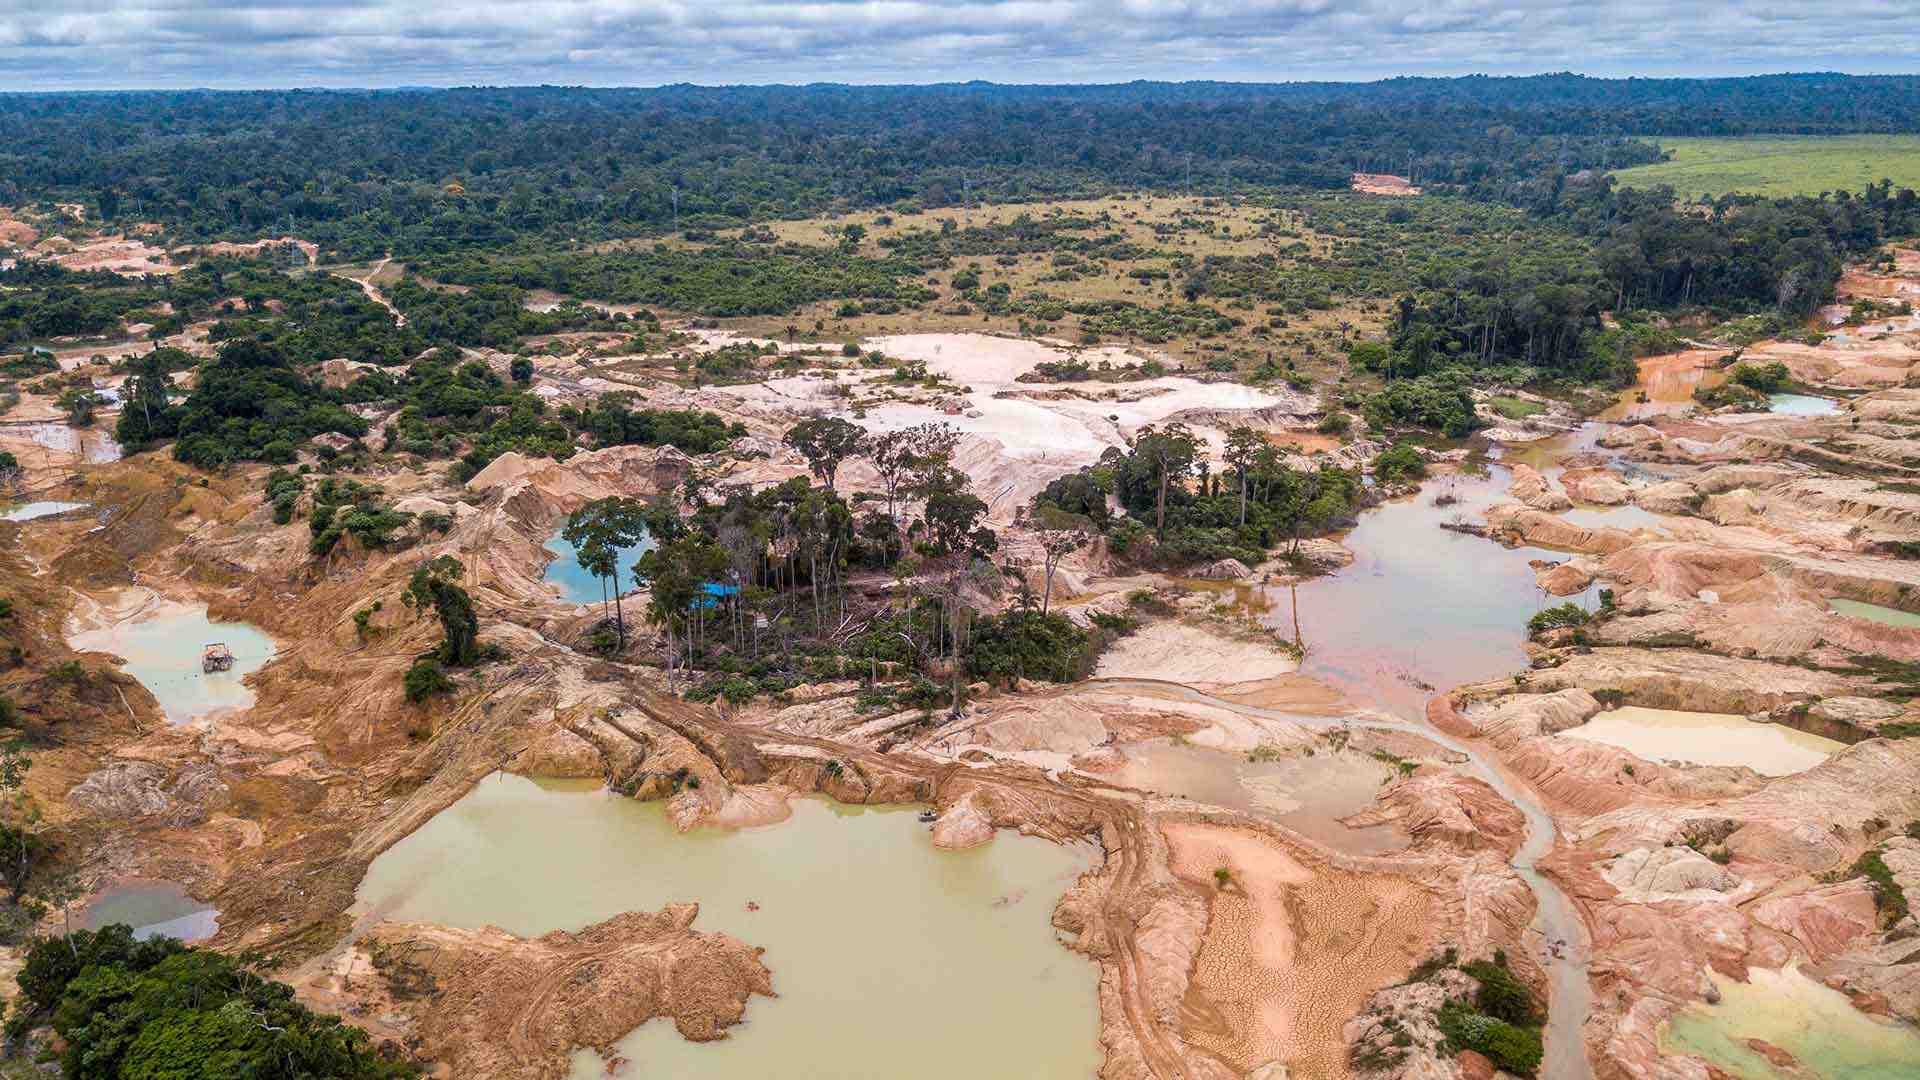 Aerial view of deforested area of the Amazon